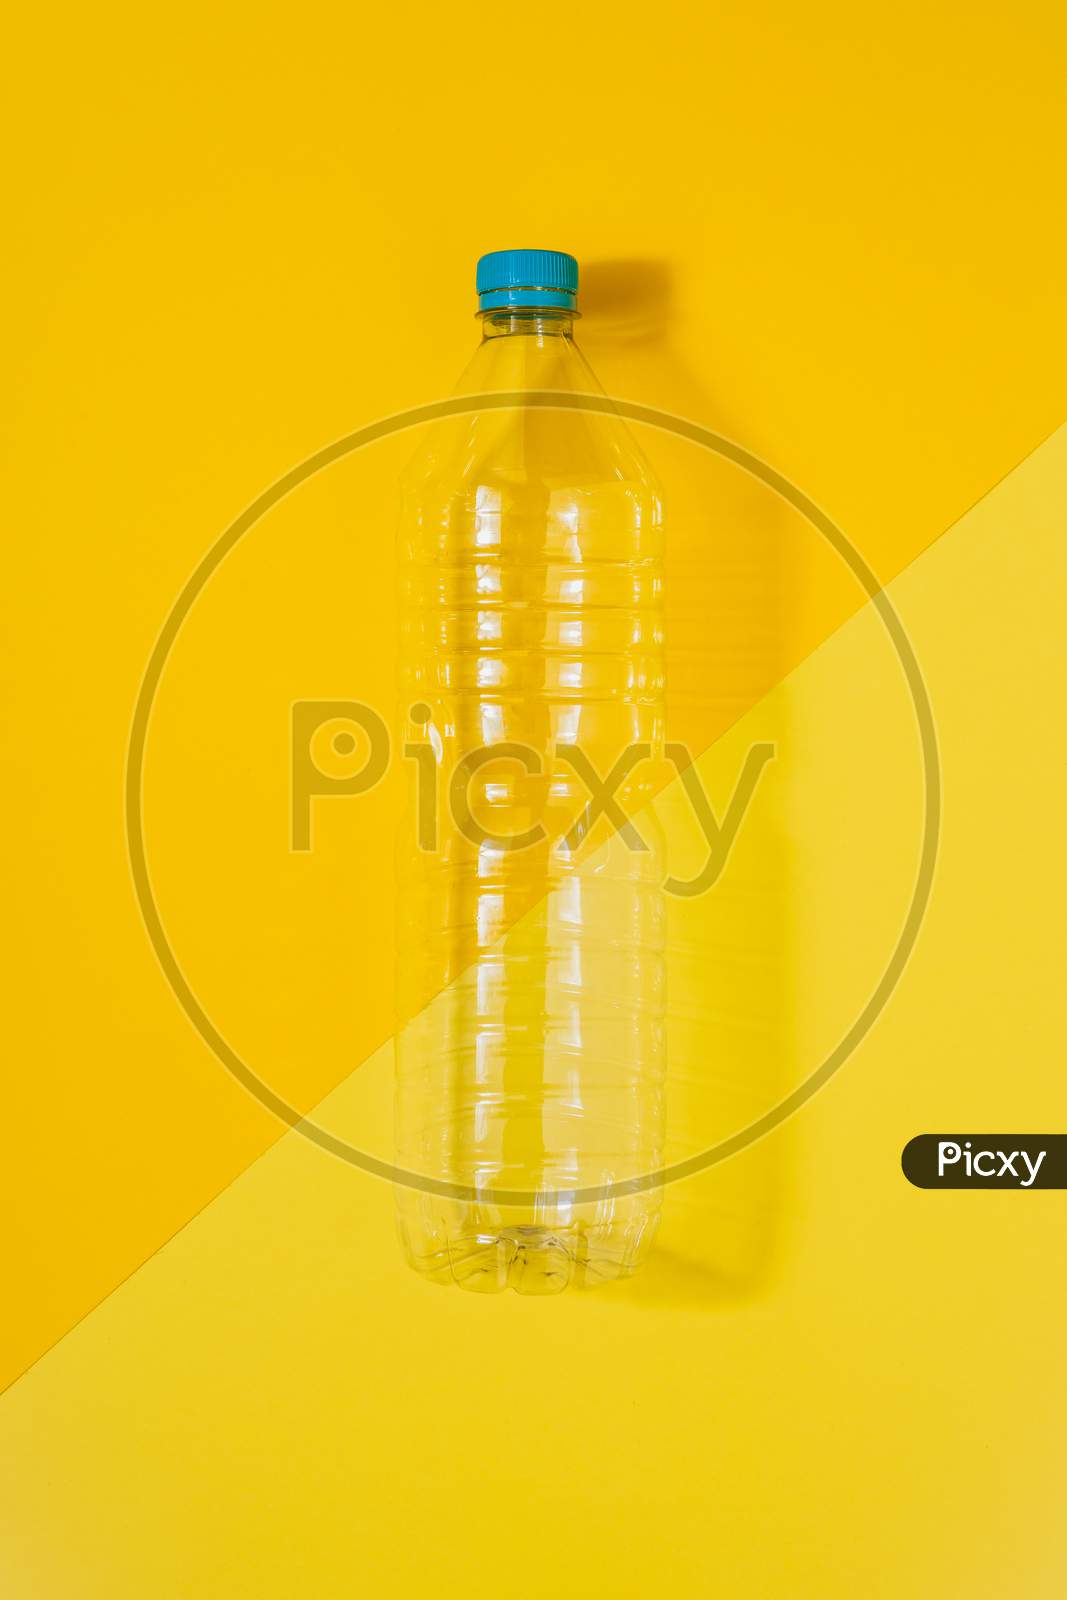 Clear Plastic Bottle With Blue Cap On A Yellow Background. Recycling And Environment Concept.